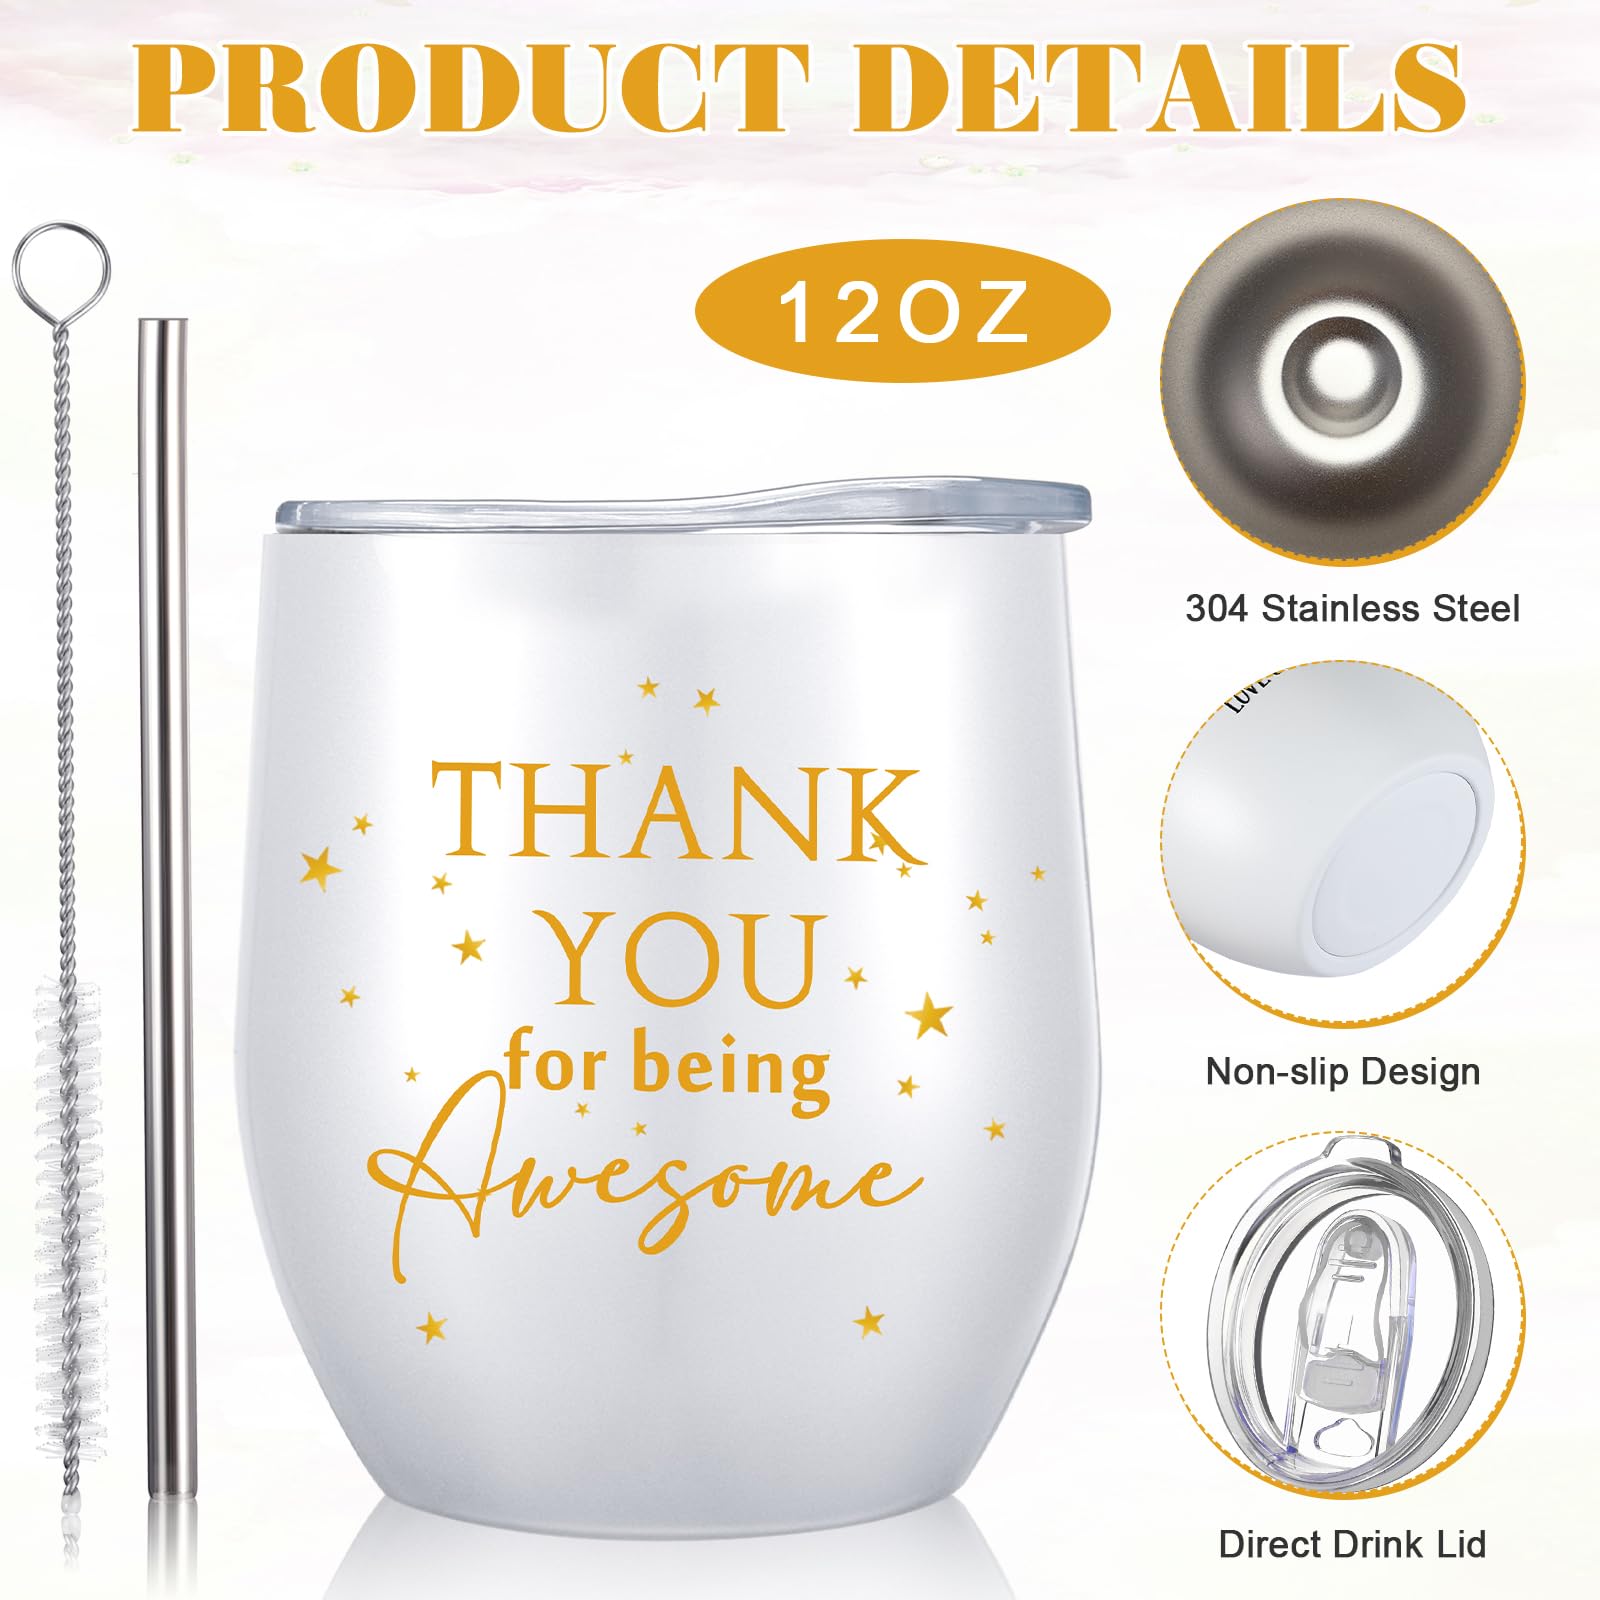 Sieral Thank You Gifts for Women Employee Appreciation Gifts Thank You for Being Awesome 12oz Stainless Steel Tumbler Keychain Makeup Bag for Team staff Coworker Teacher Nurse Gifts(Star)